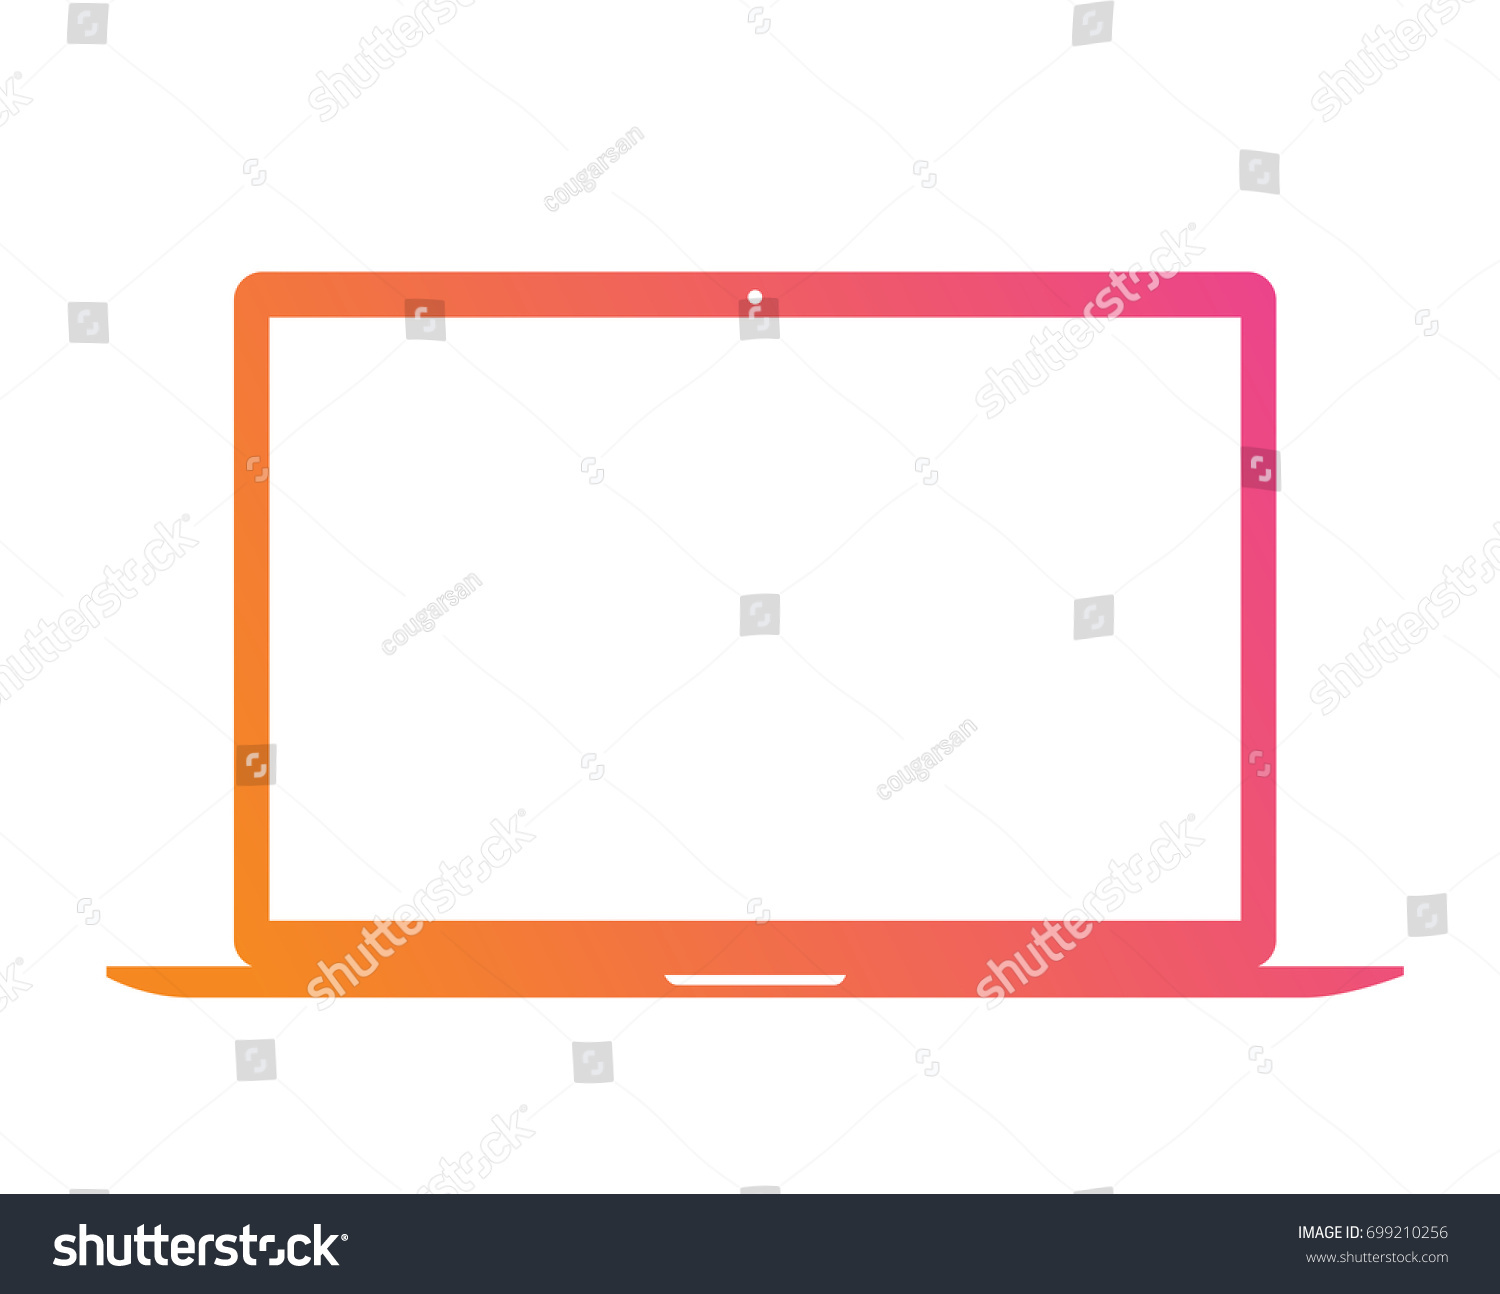 SVG of The Vector gradient pink to orange flat laptop computer icon svg